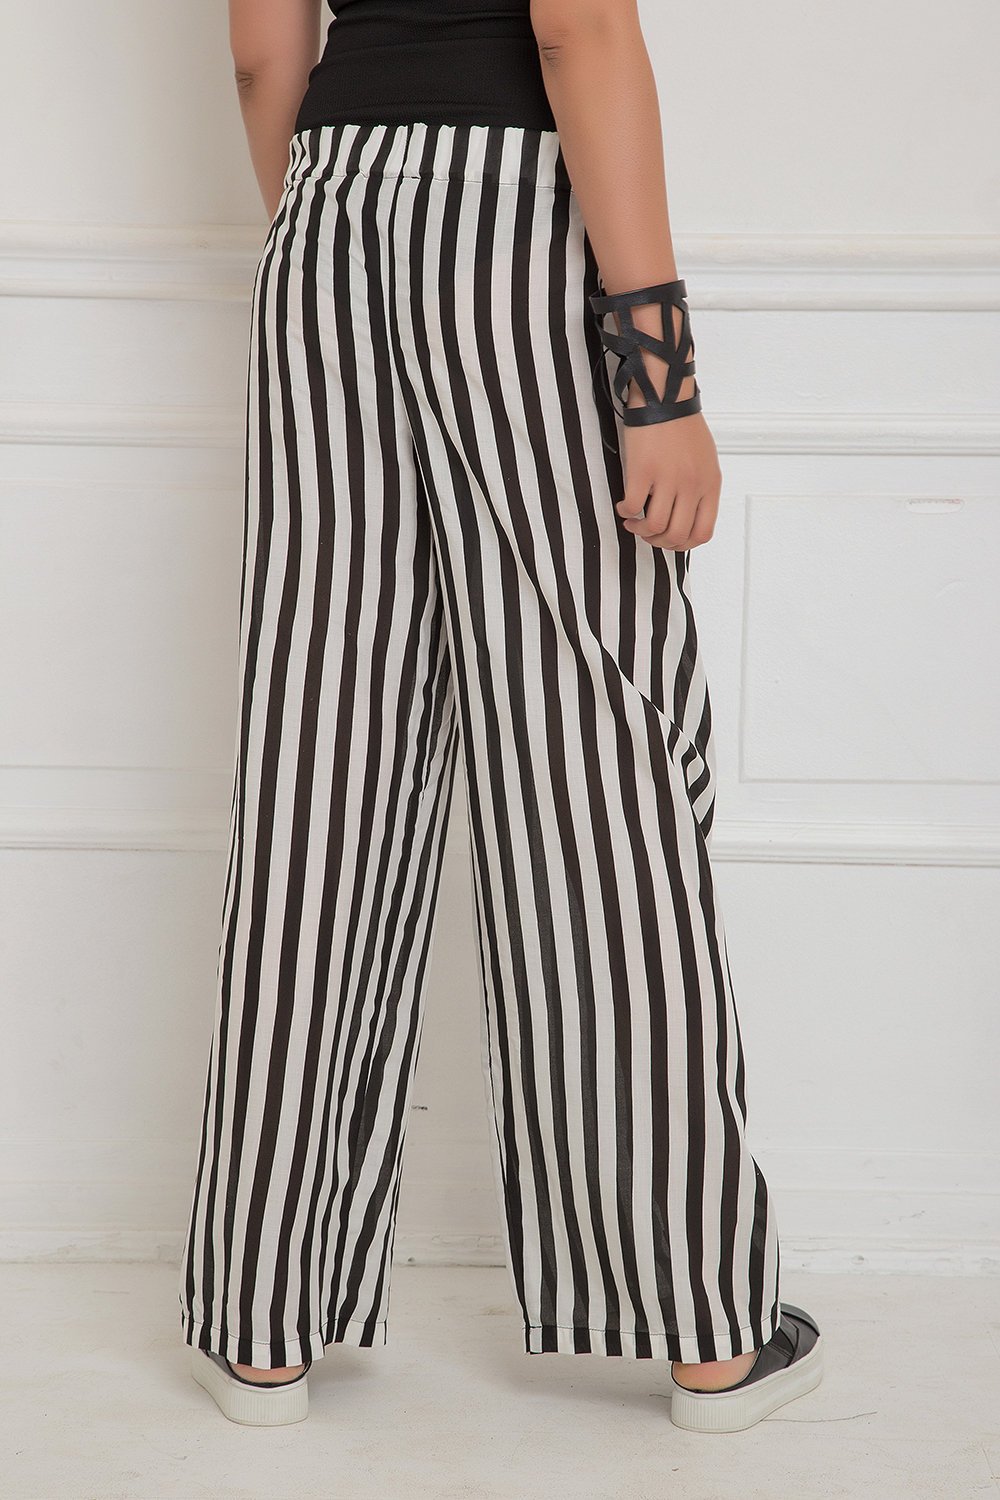 womens striped pants black and white